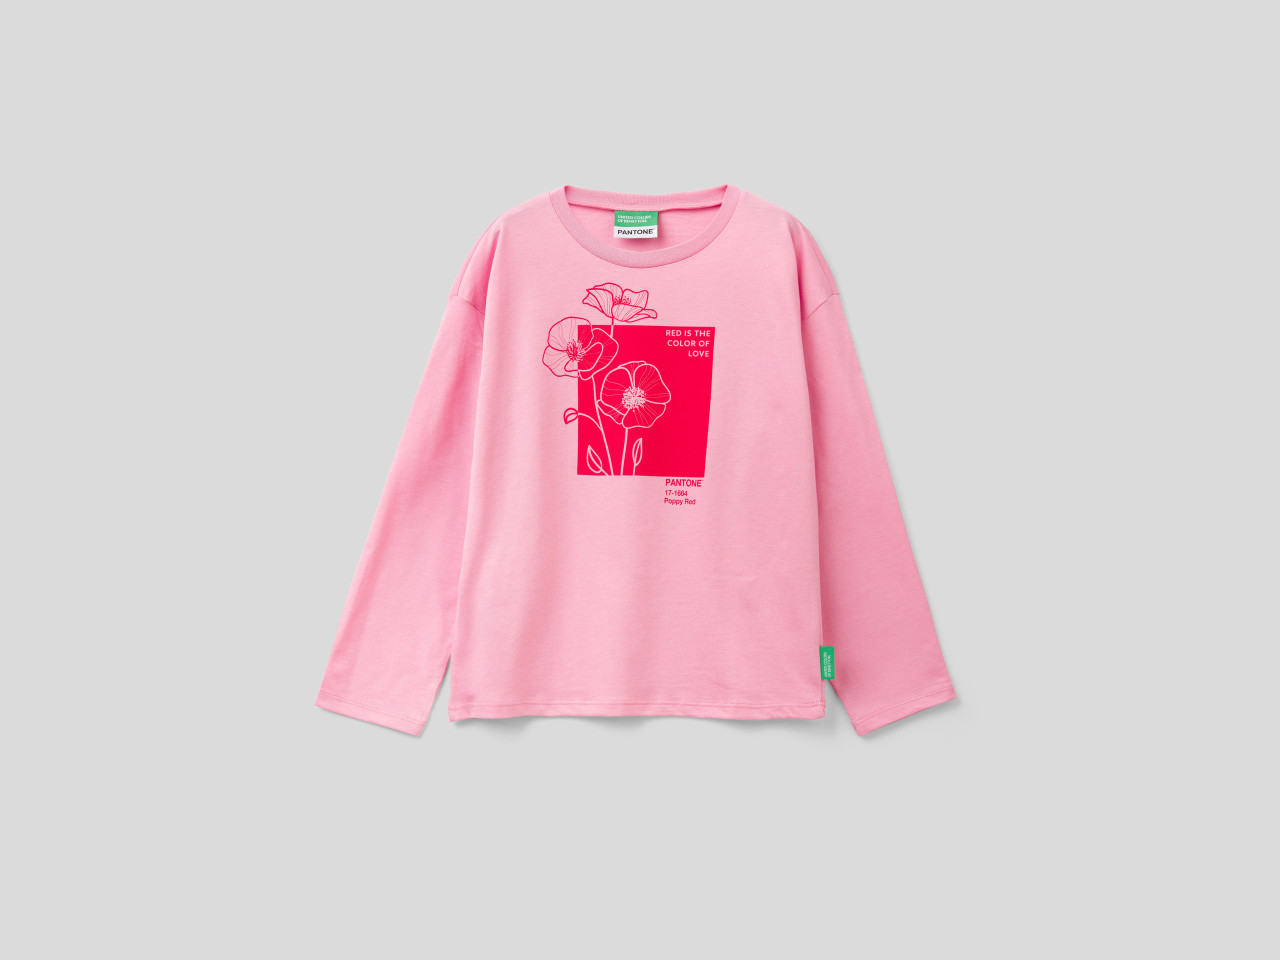 Tops Tee-shirts United Colors of Benetton Enfant Top Tee-shirt UNITED COLORS OF Enfant Fille United Colors of Benetton Vêtements United Colors of Benetton Enfant Hauts United Colors of Benetton Enfant Tops Tee-shirts United Colors of Benetton Enfant 